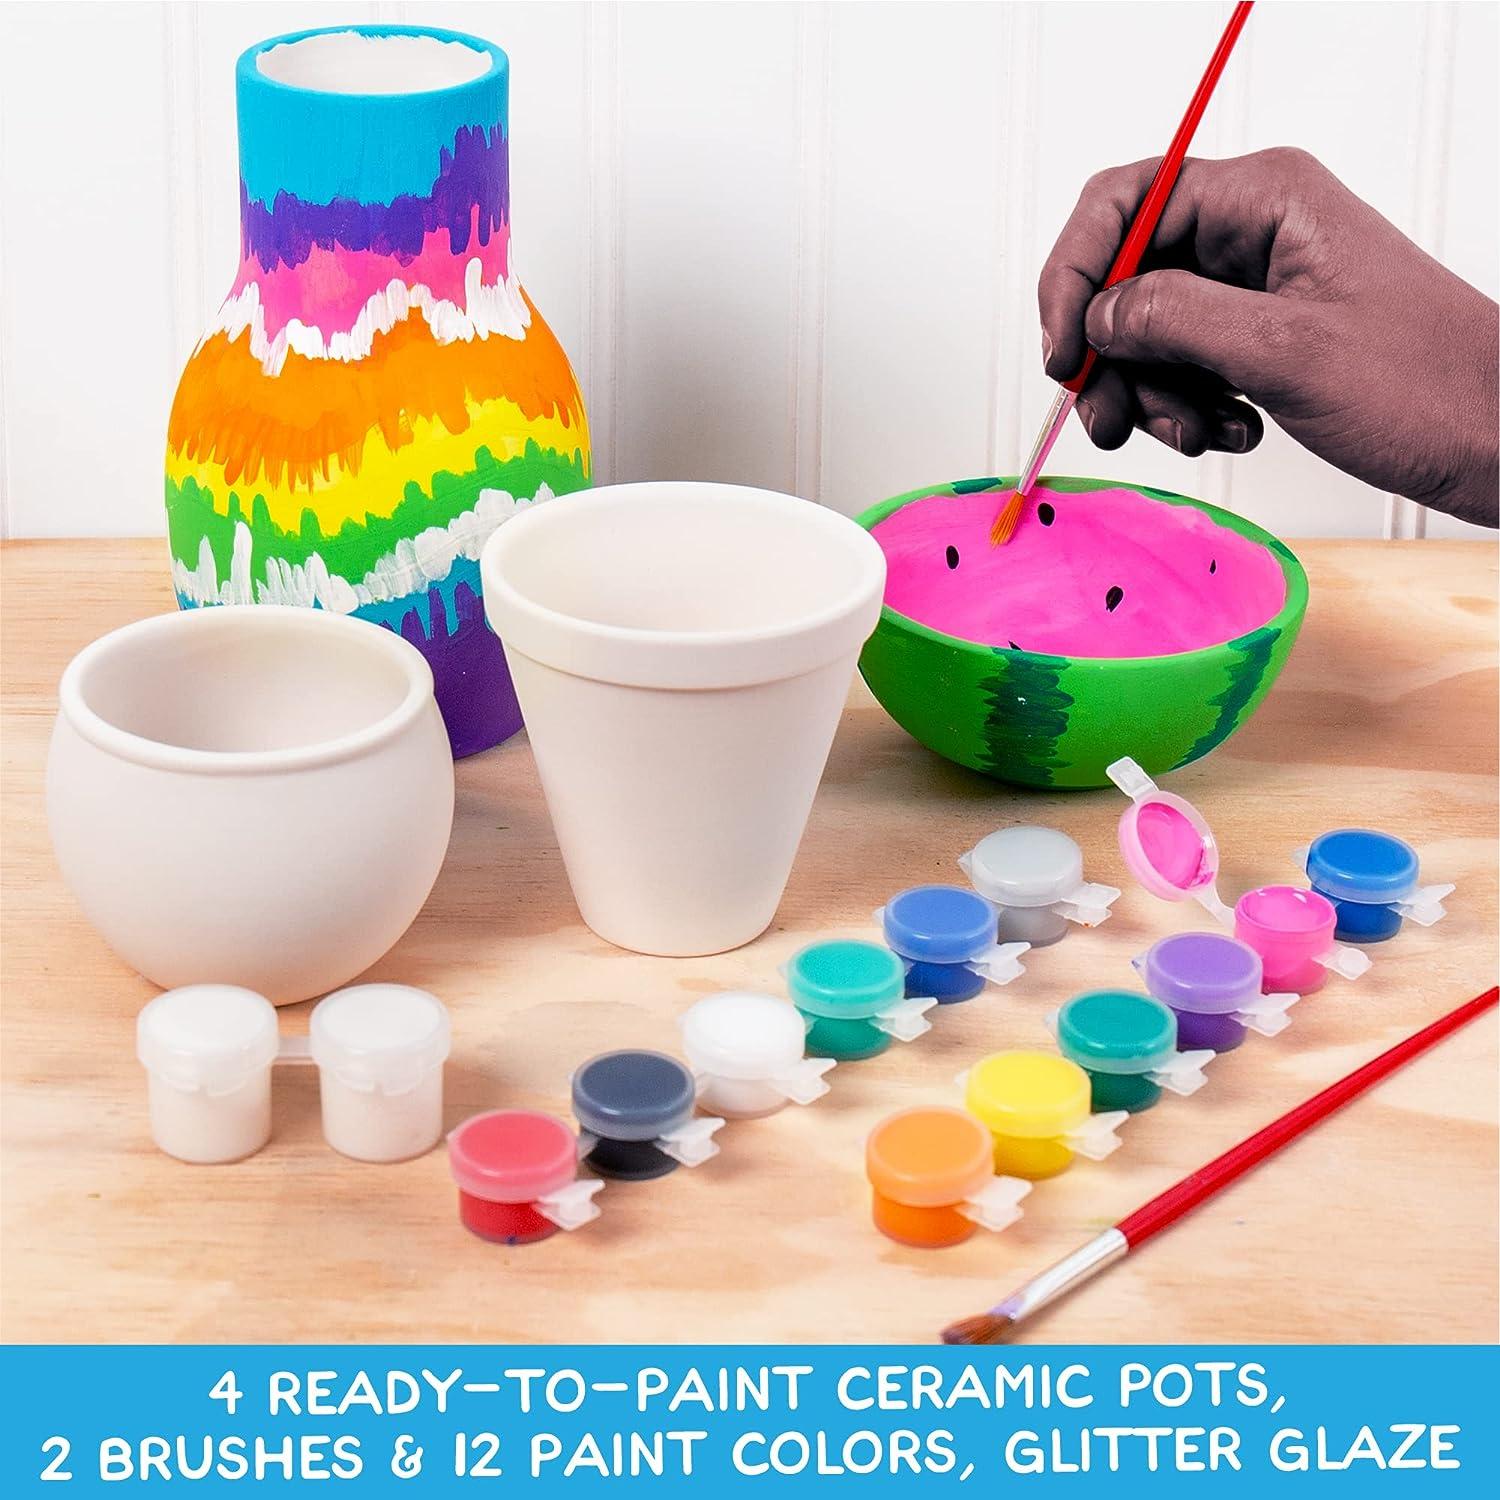 Made By Me Paint Your Own Ceramic Pottery Fun Ceramic Painting Kit